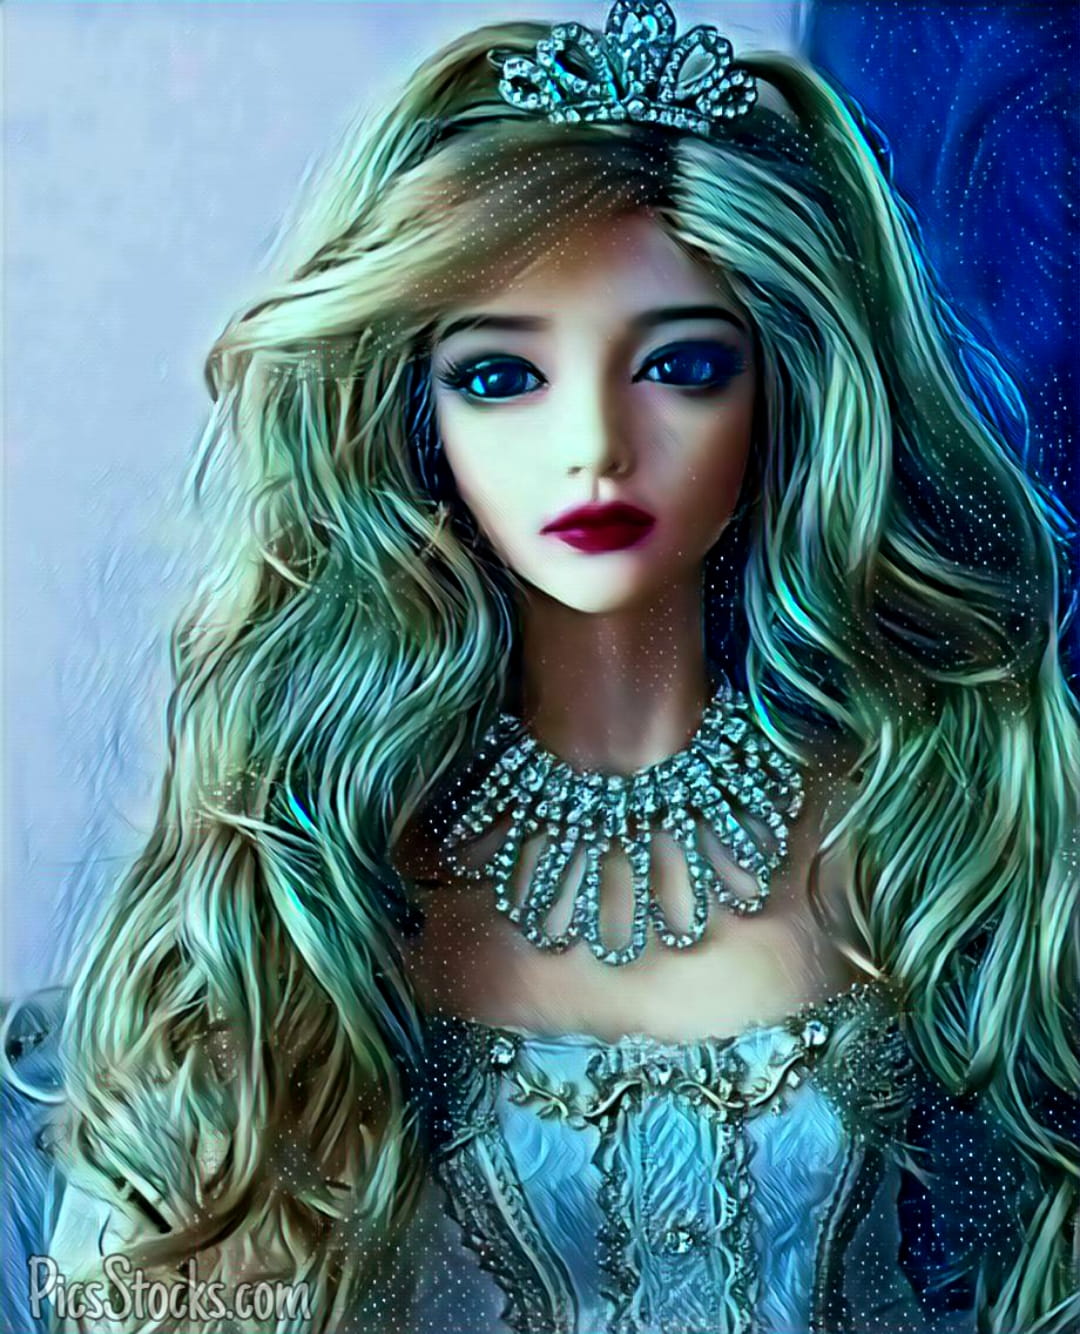 Cute barbie doll wallpapers for mobile download free